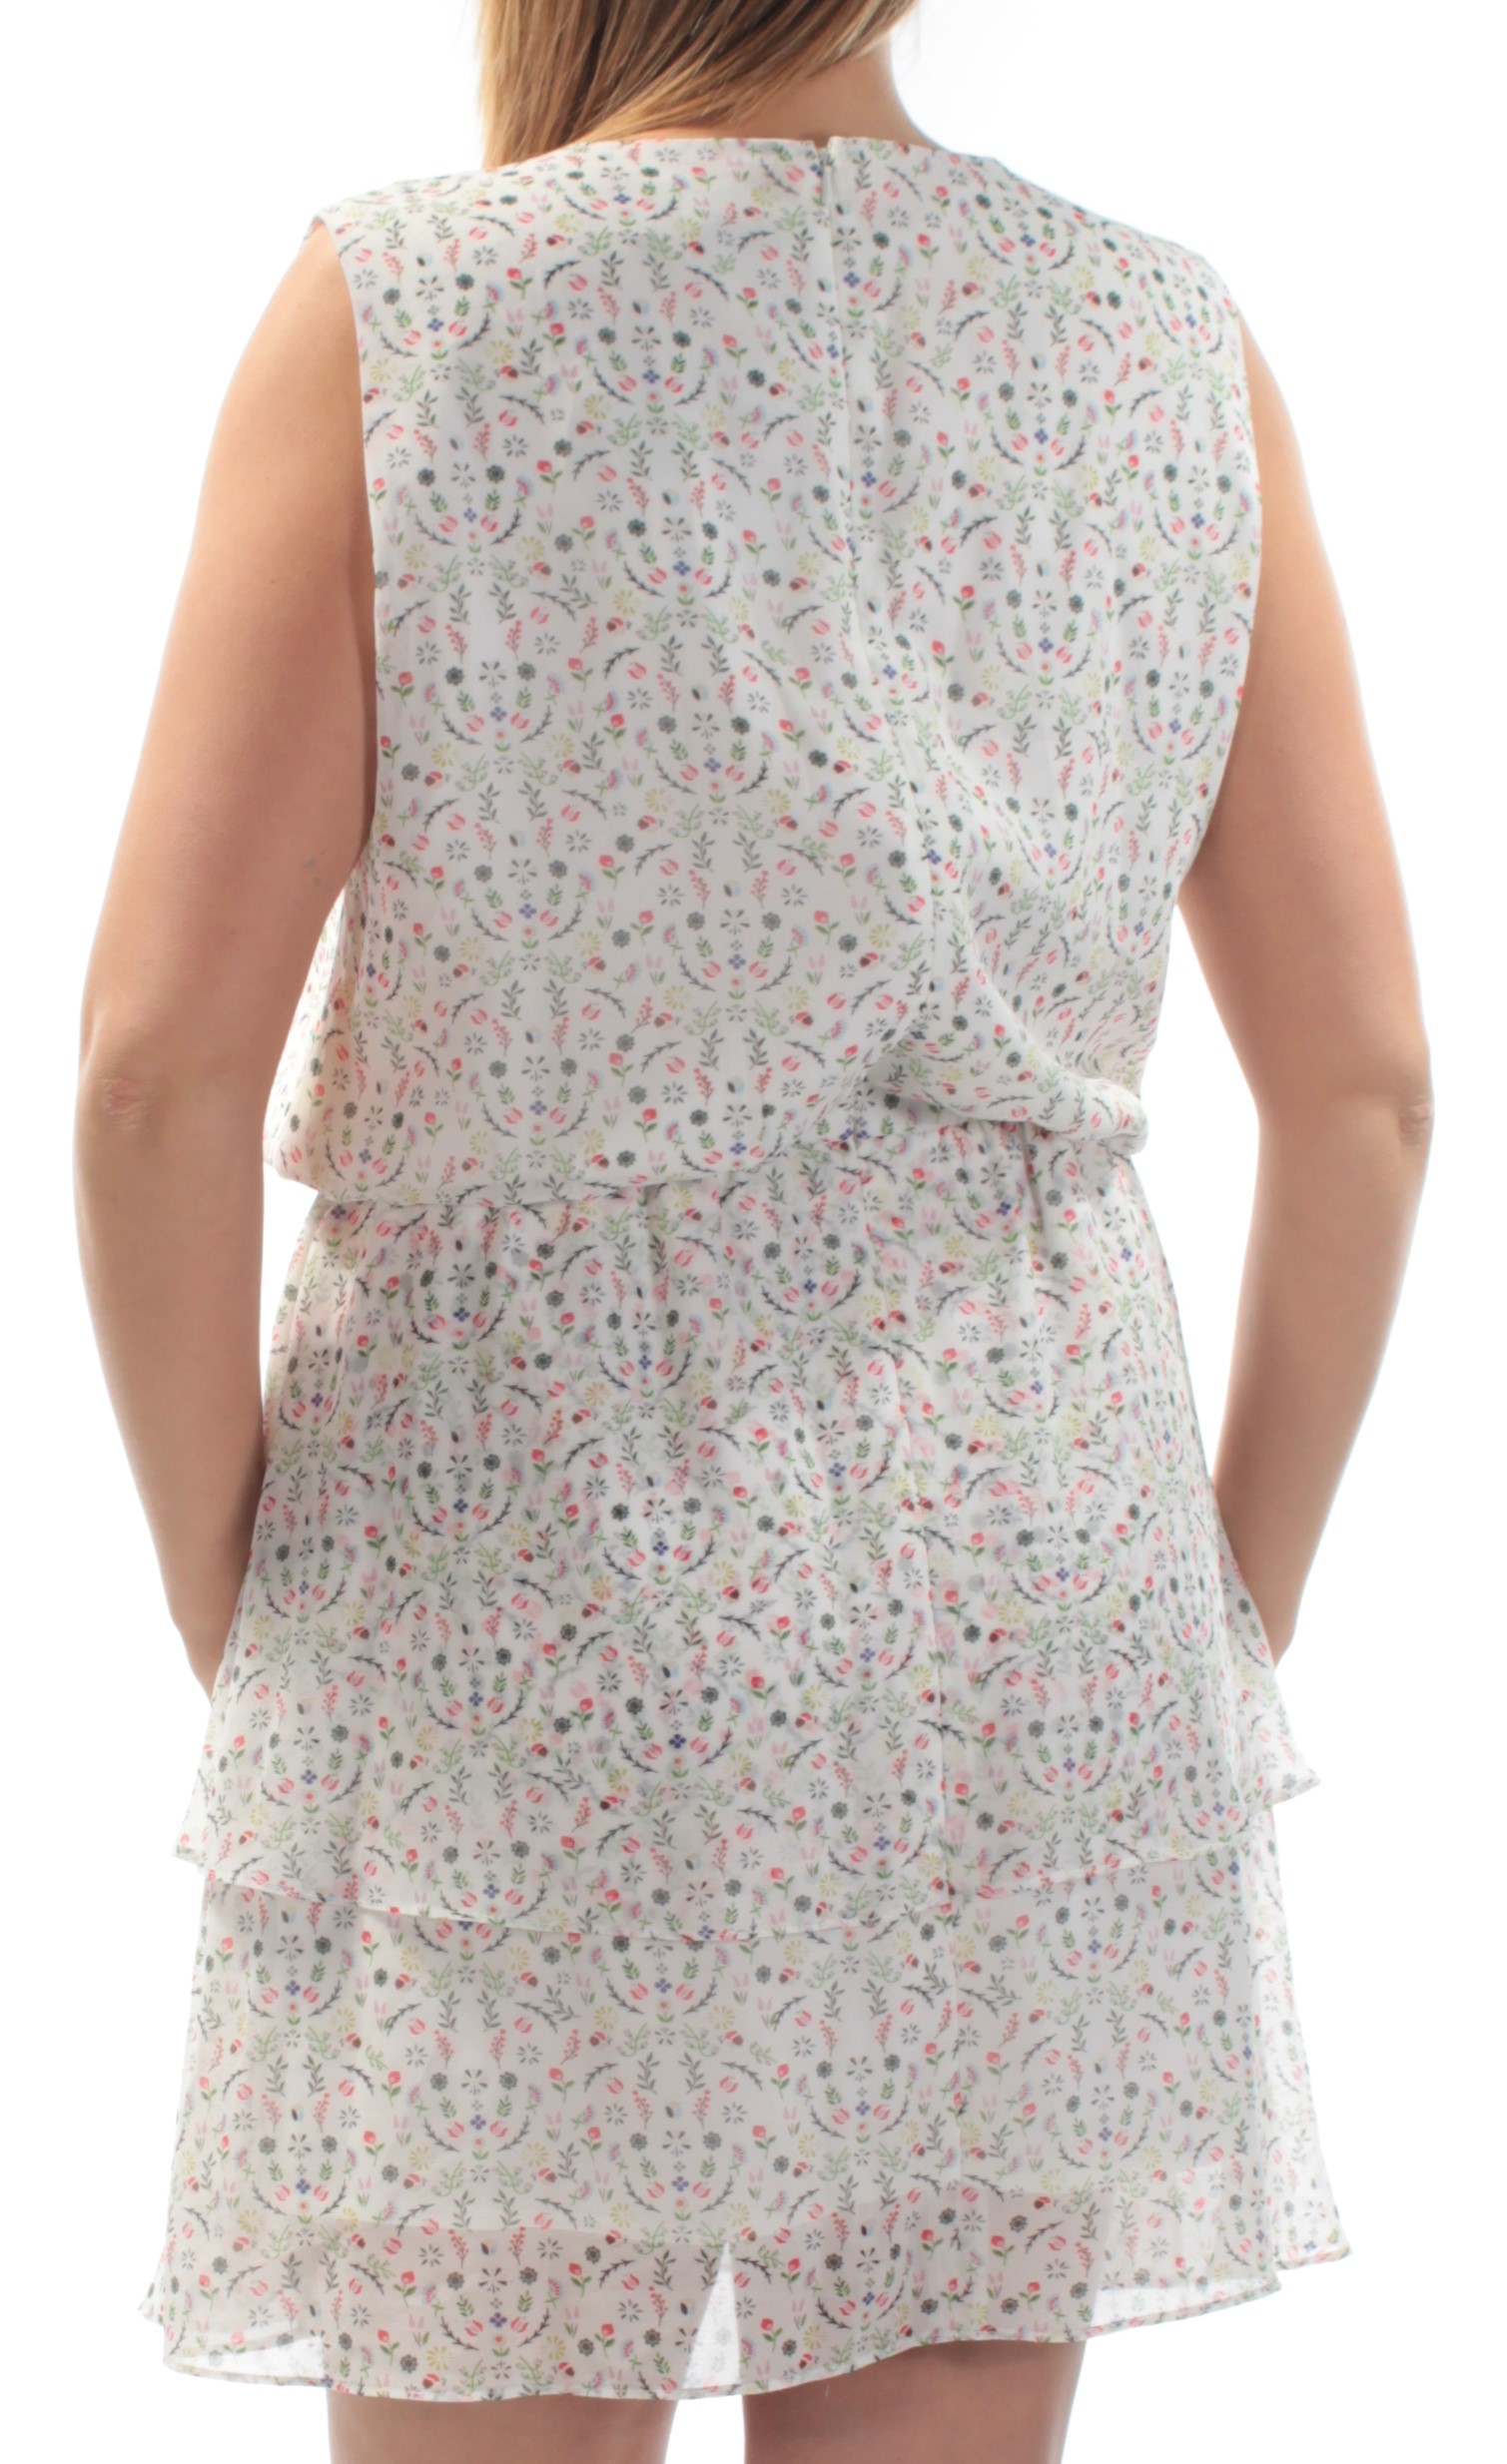 CYNTHIA ROWLEY Womens White Floral Sleeveless Jewel Neck Above The Knee Fit + Flare Dress L - image 4 of 4